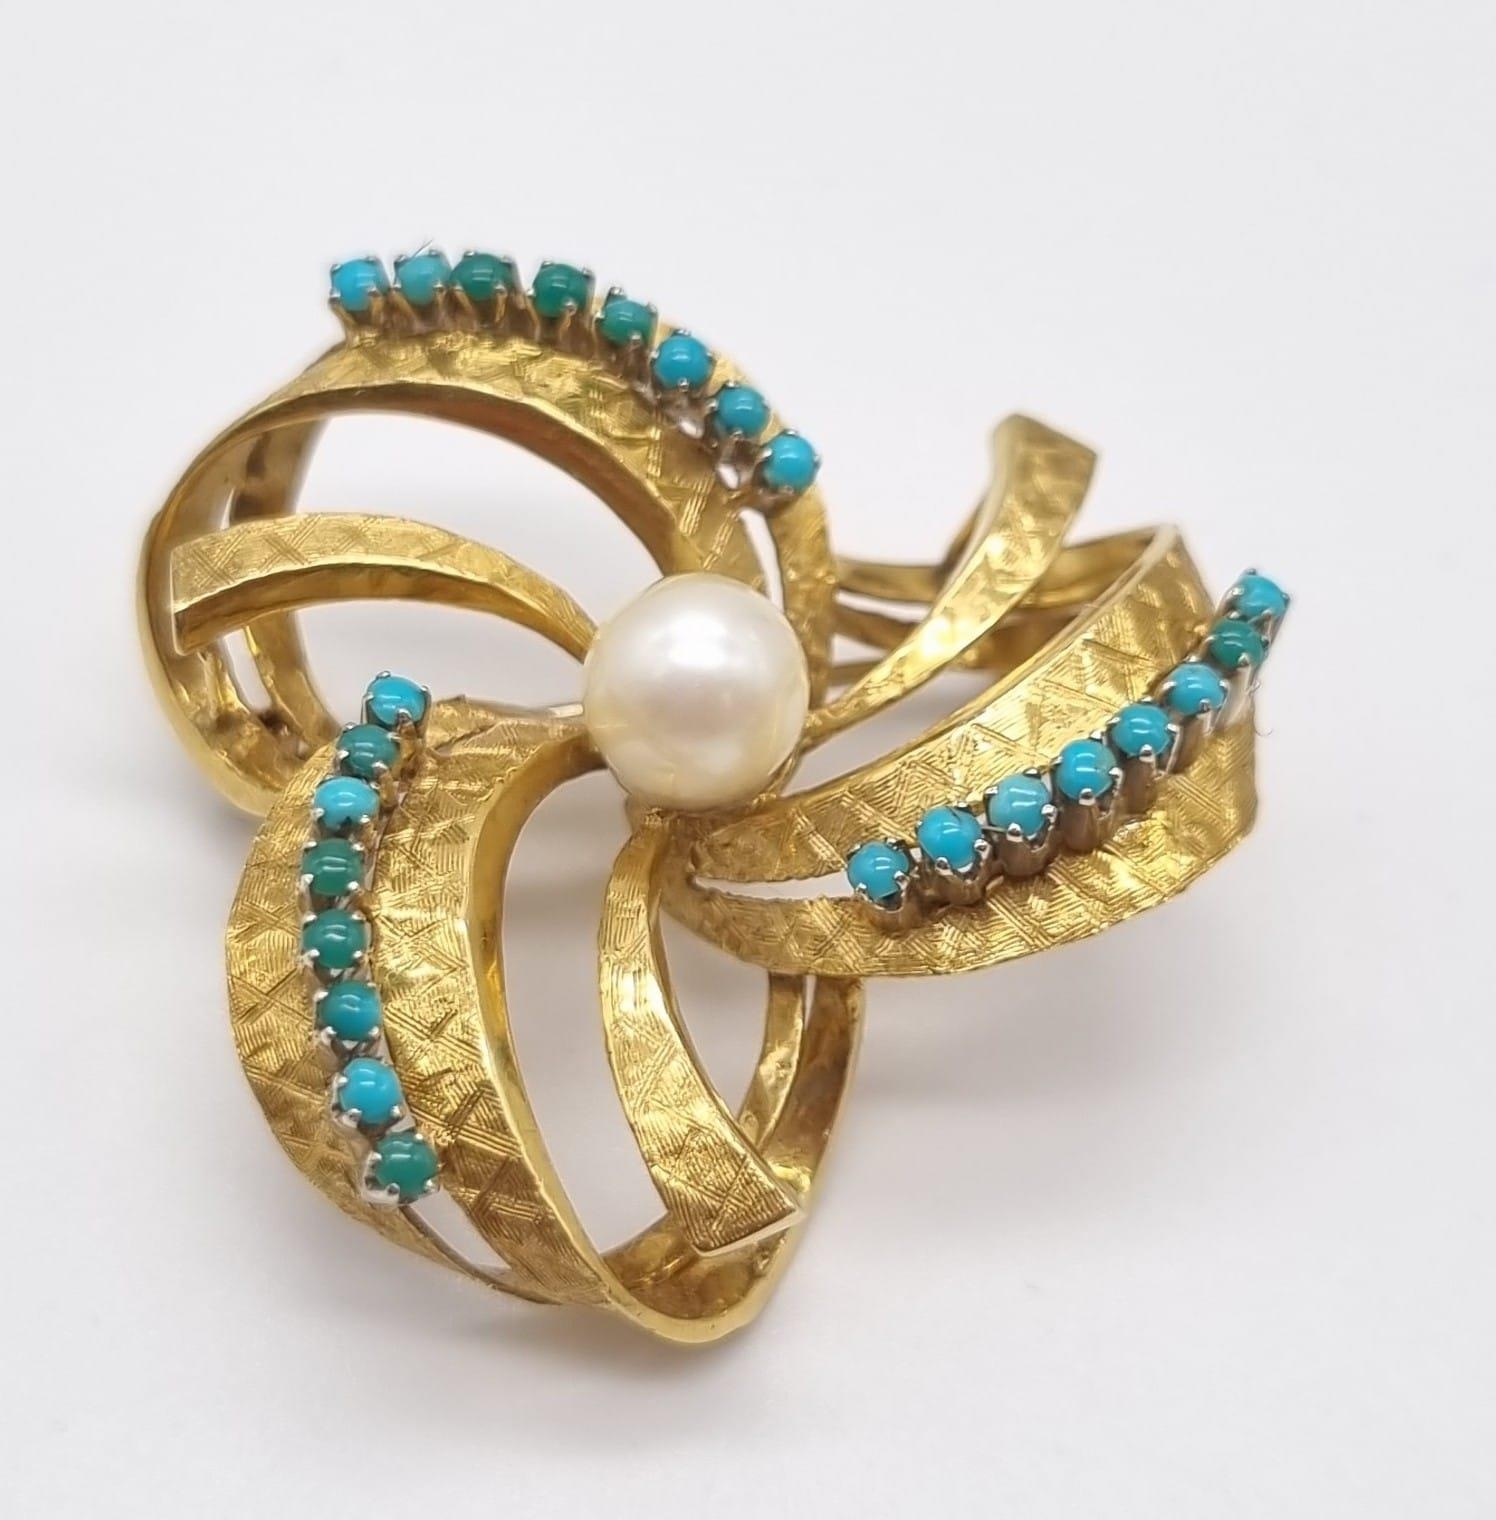 A Wonderful Vintage Possibly Antique 18K Yellow Gold, Turquoise and Pearl Ring/Brooch Set. Ring - - Image 10 of 13